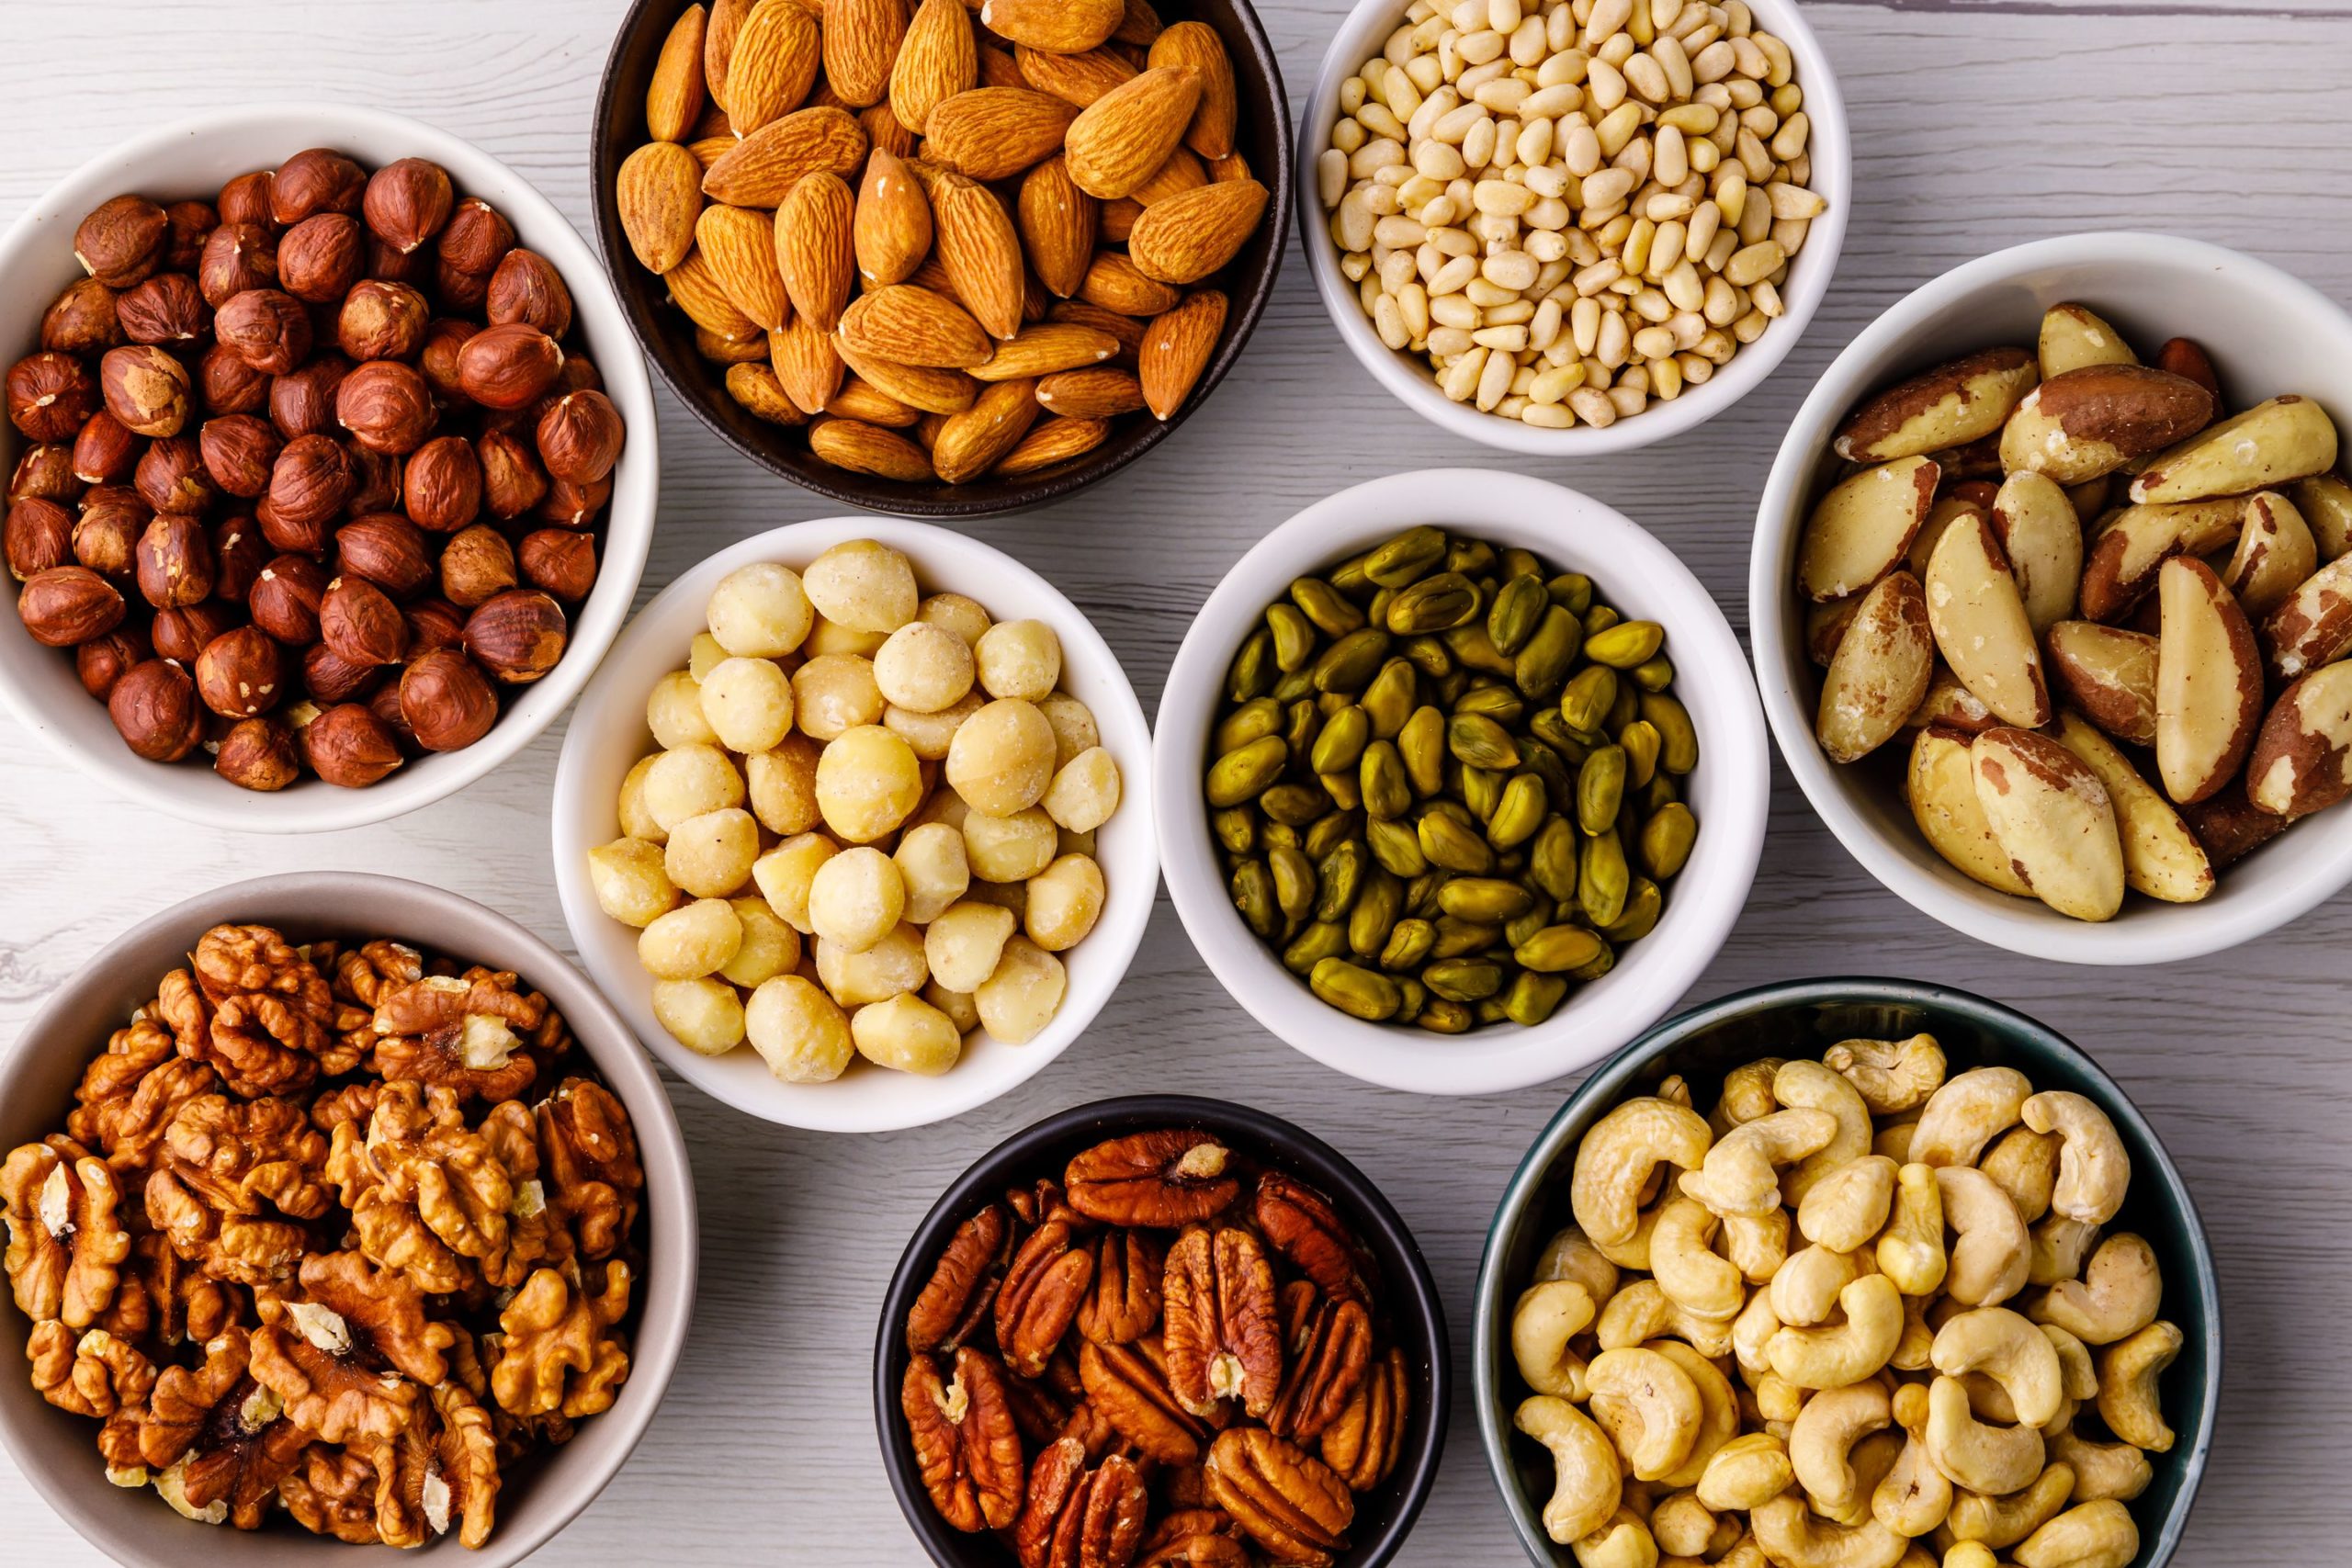 Can you eat seeds with a nut allergy